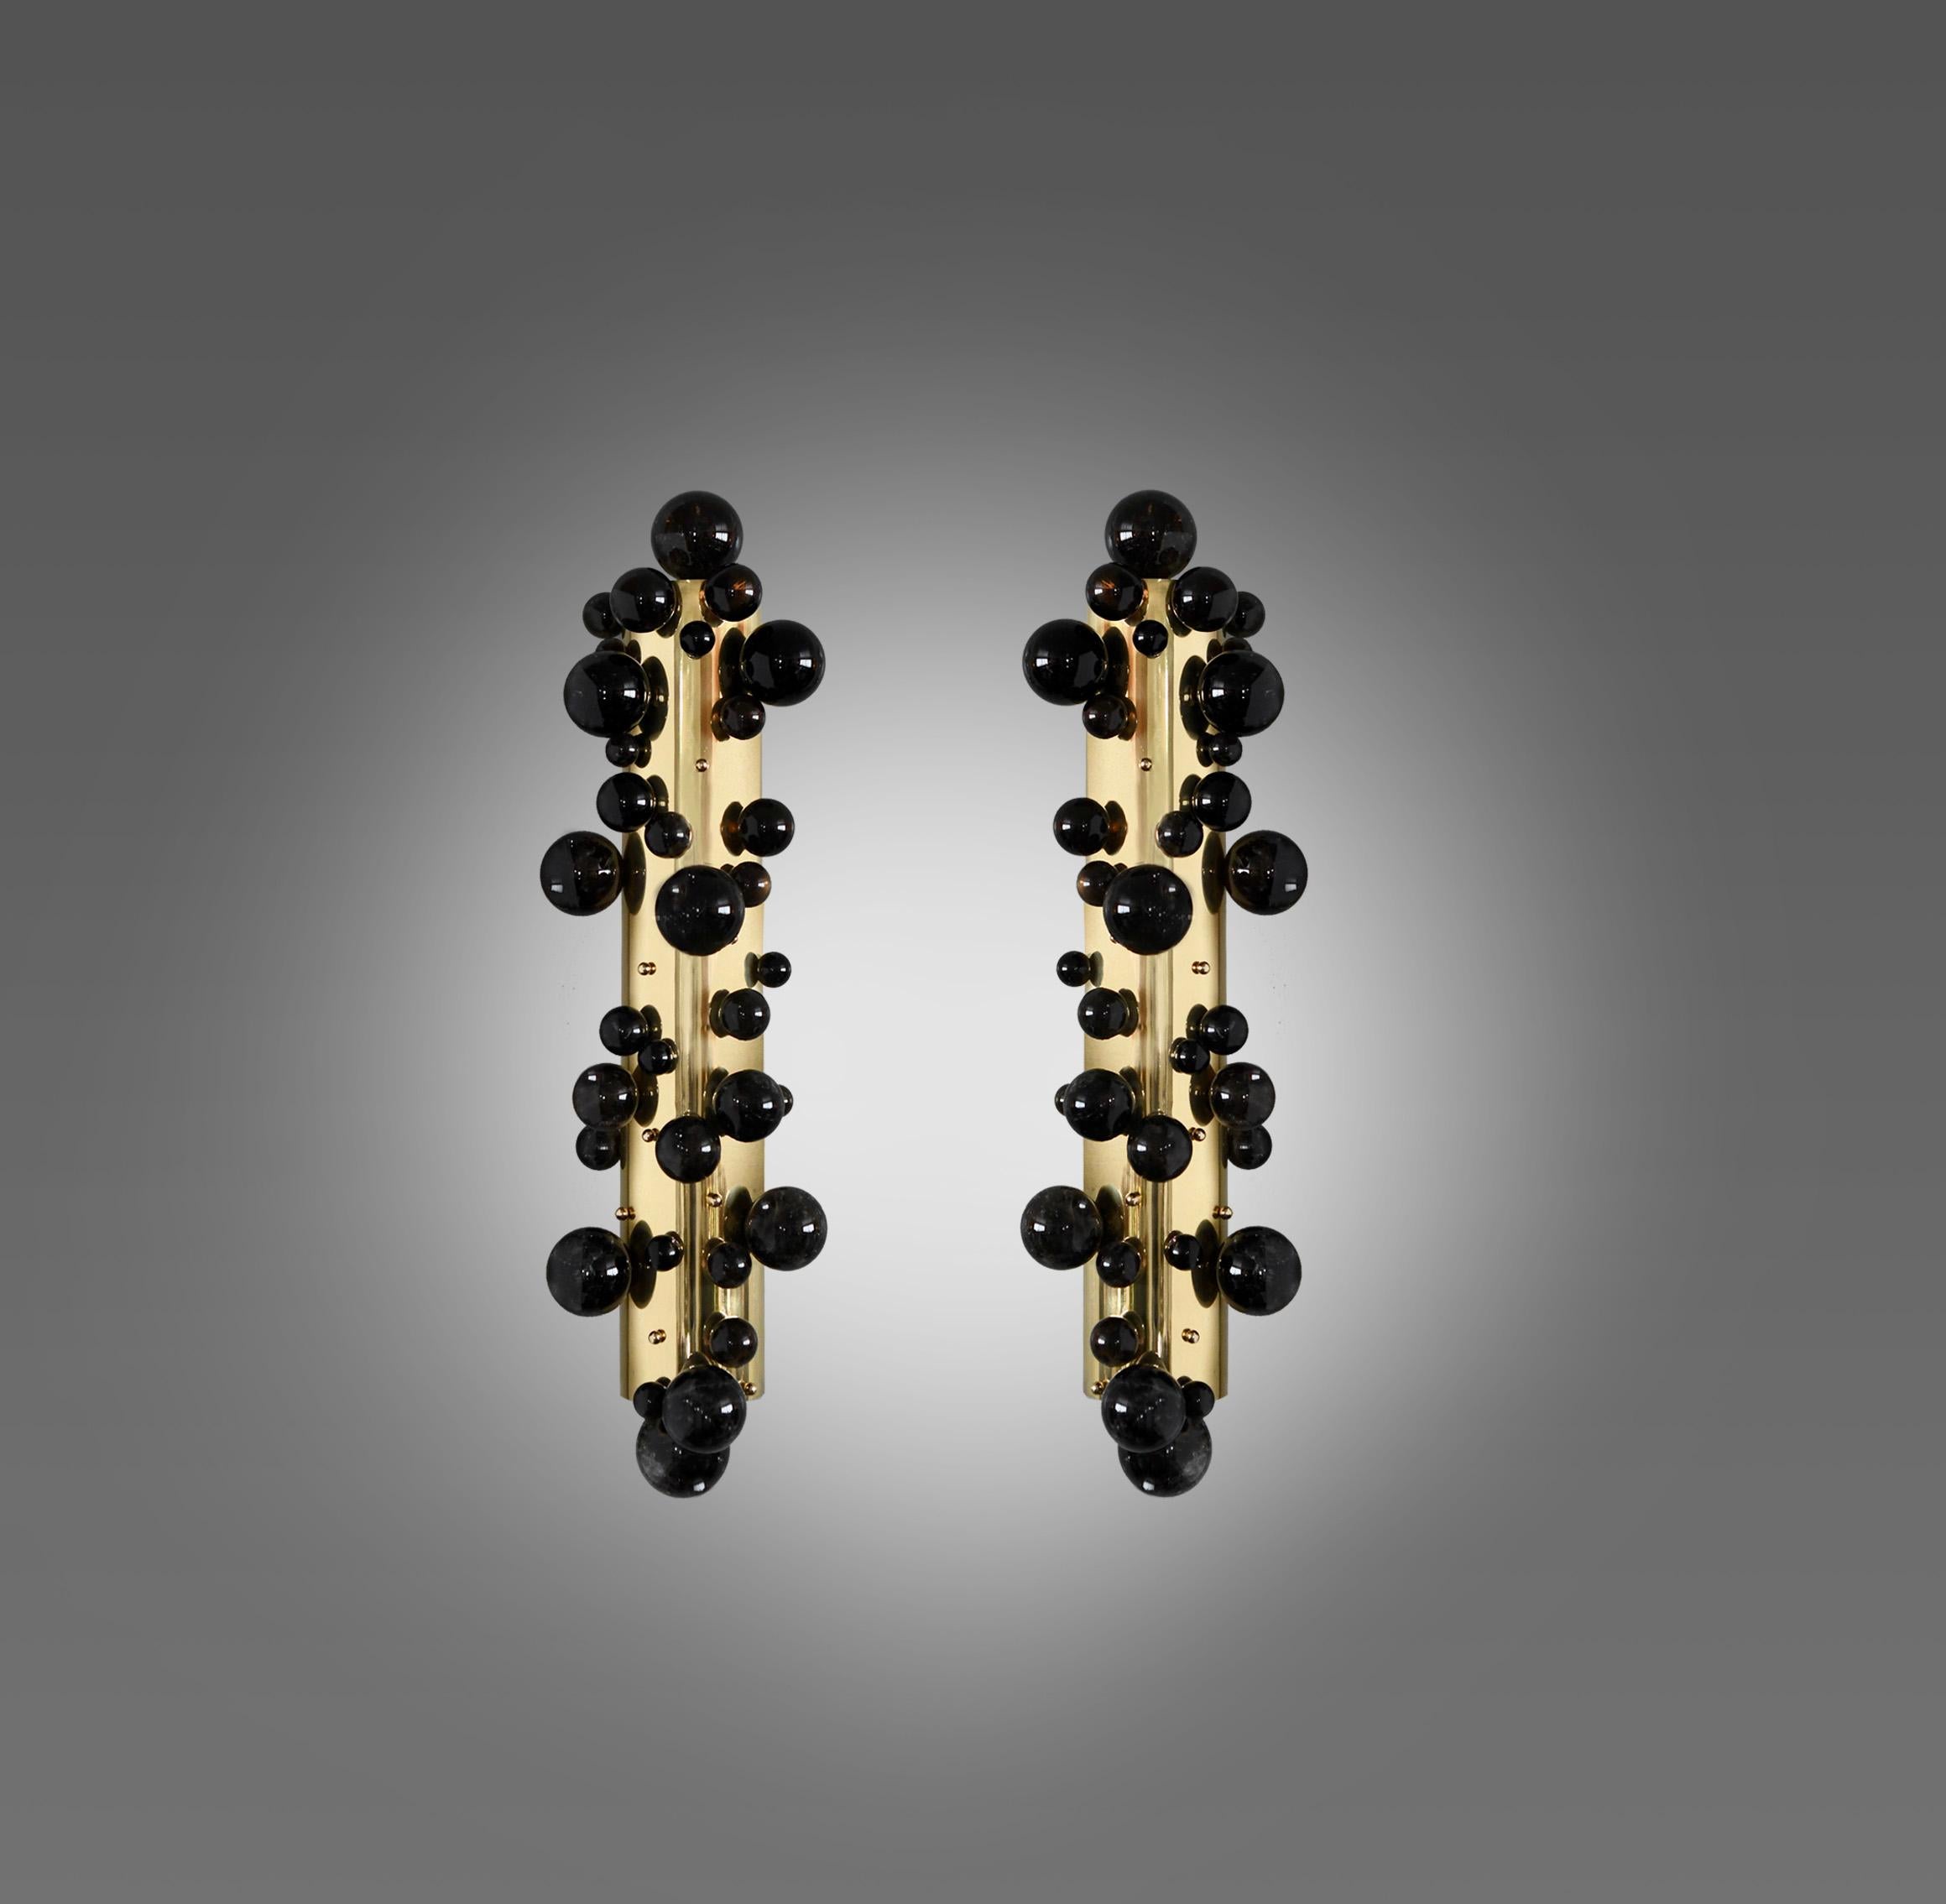 Pair of dark bubble rock crystal sconces with the polished brass finishes. Created by Phoenix gallery NYC.
Each sconce installed four sockets. Use four 60w LED warm light bulbs. Total 240w max. Light bulbs included. 
Custom size upon